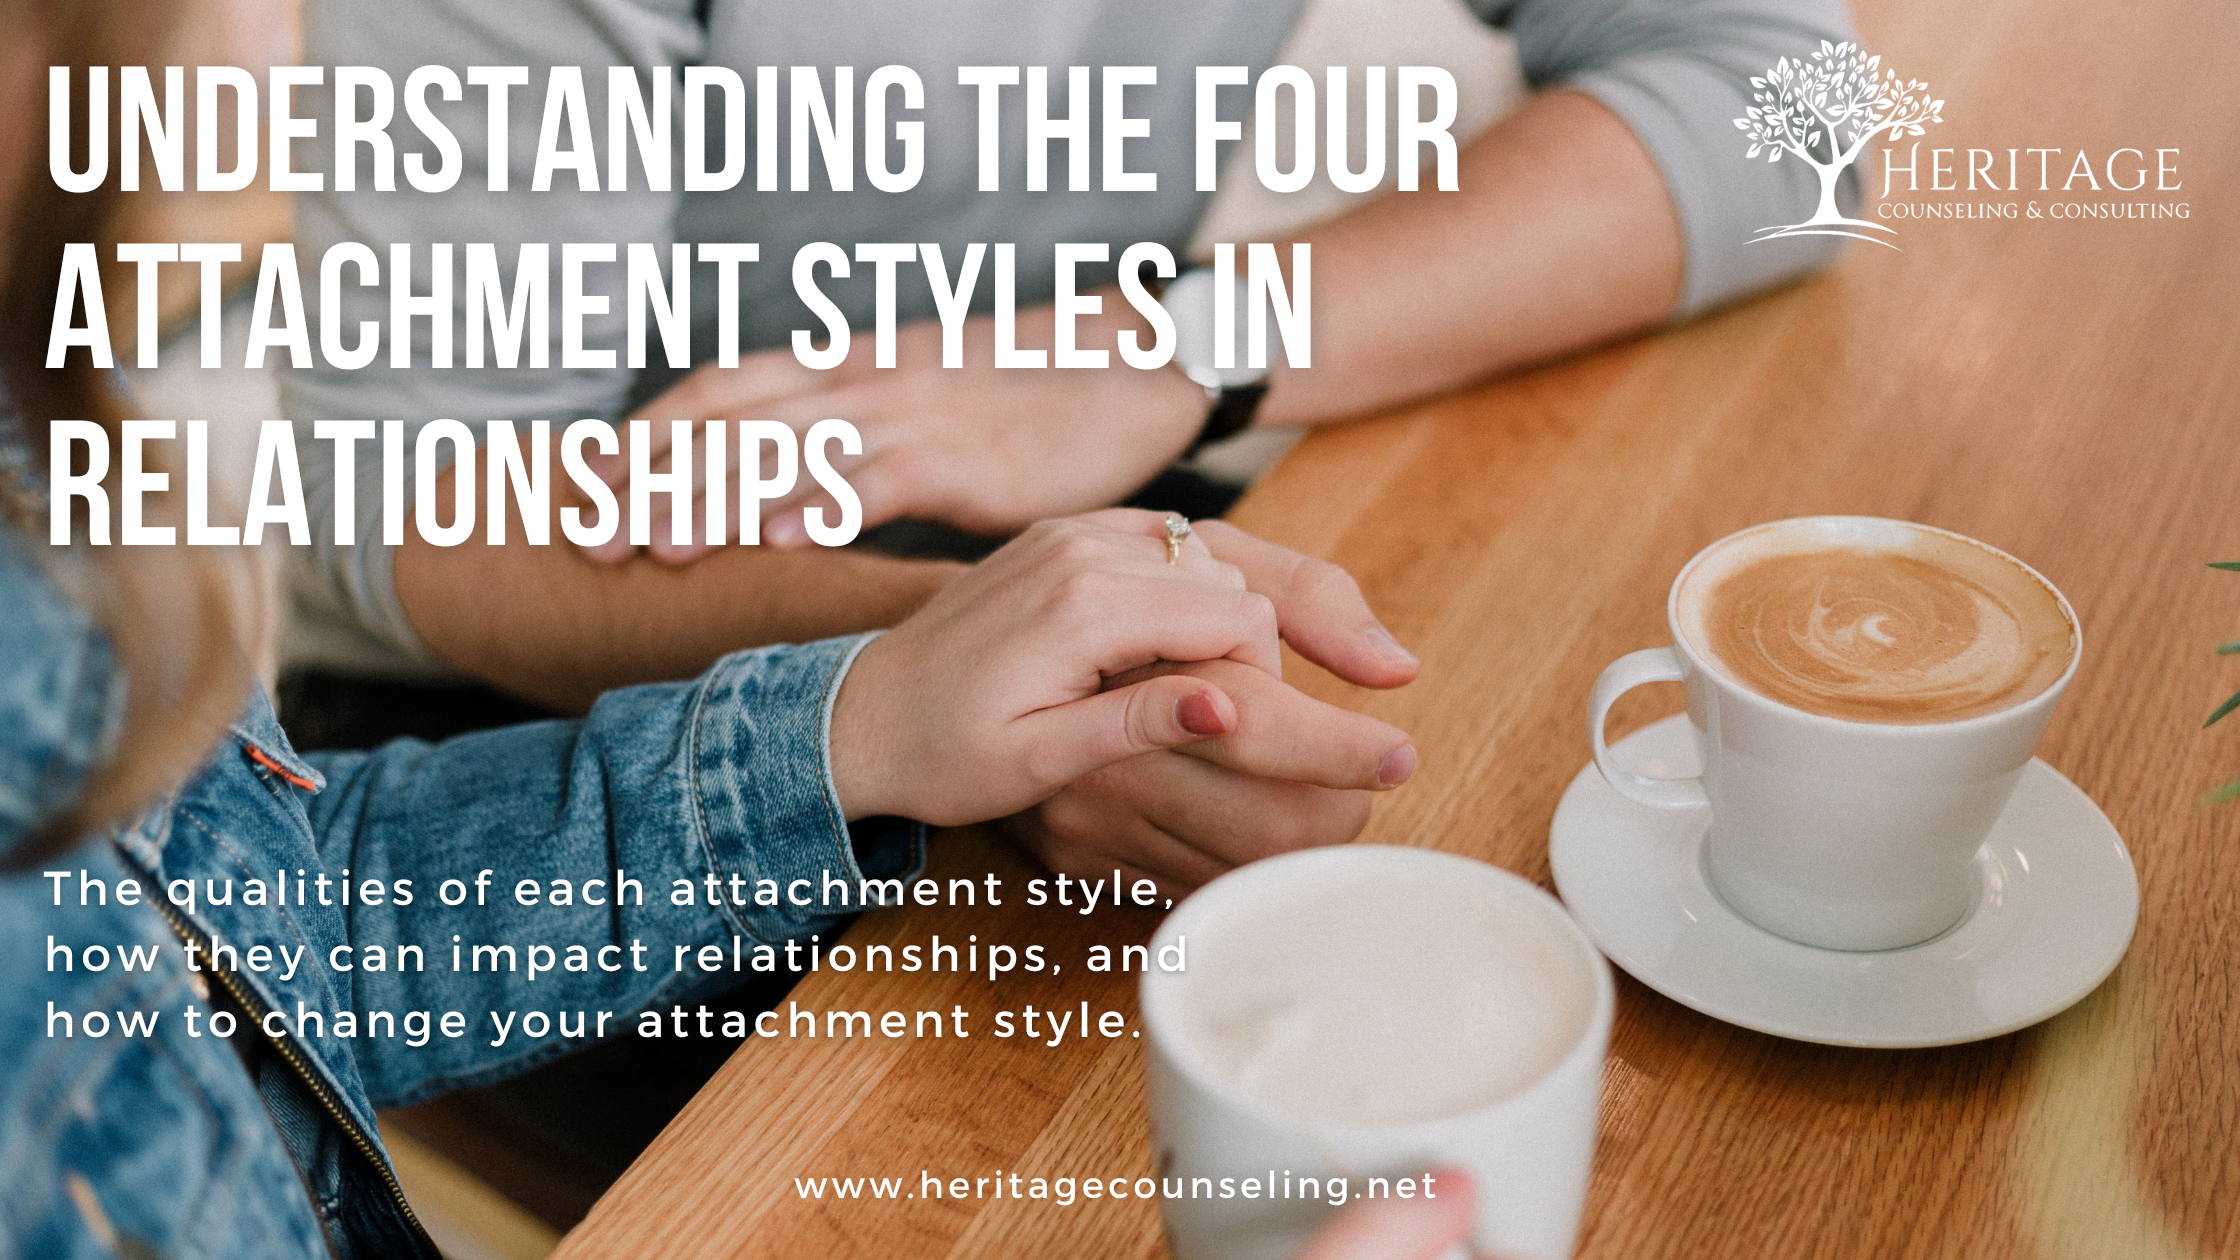 Understanding the Four Attachment Styles in Relationships